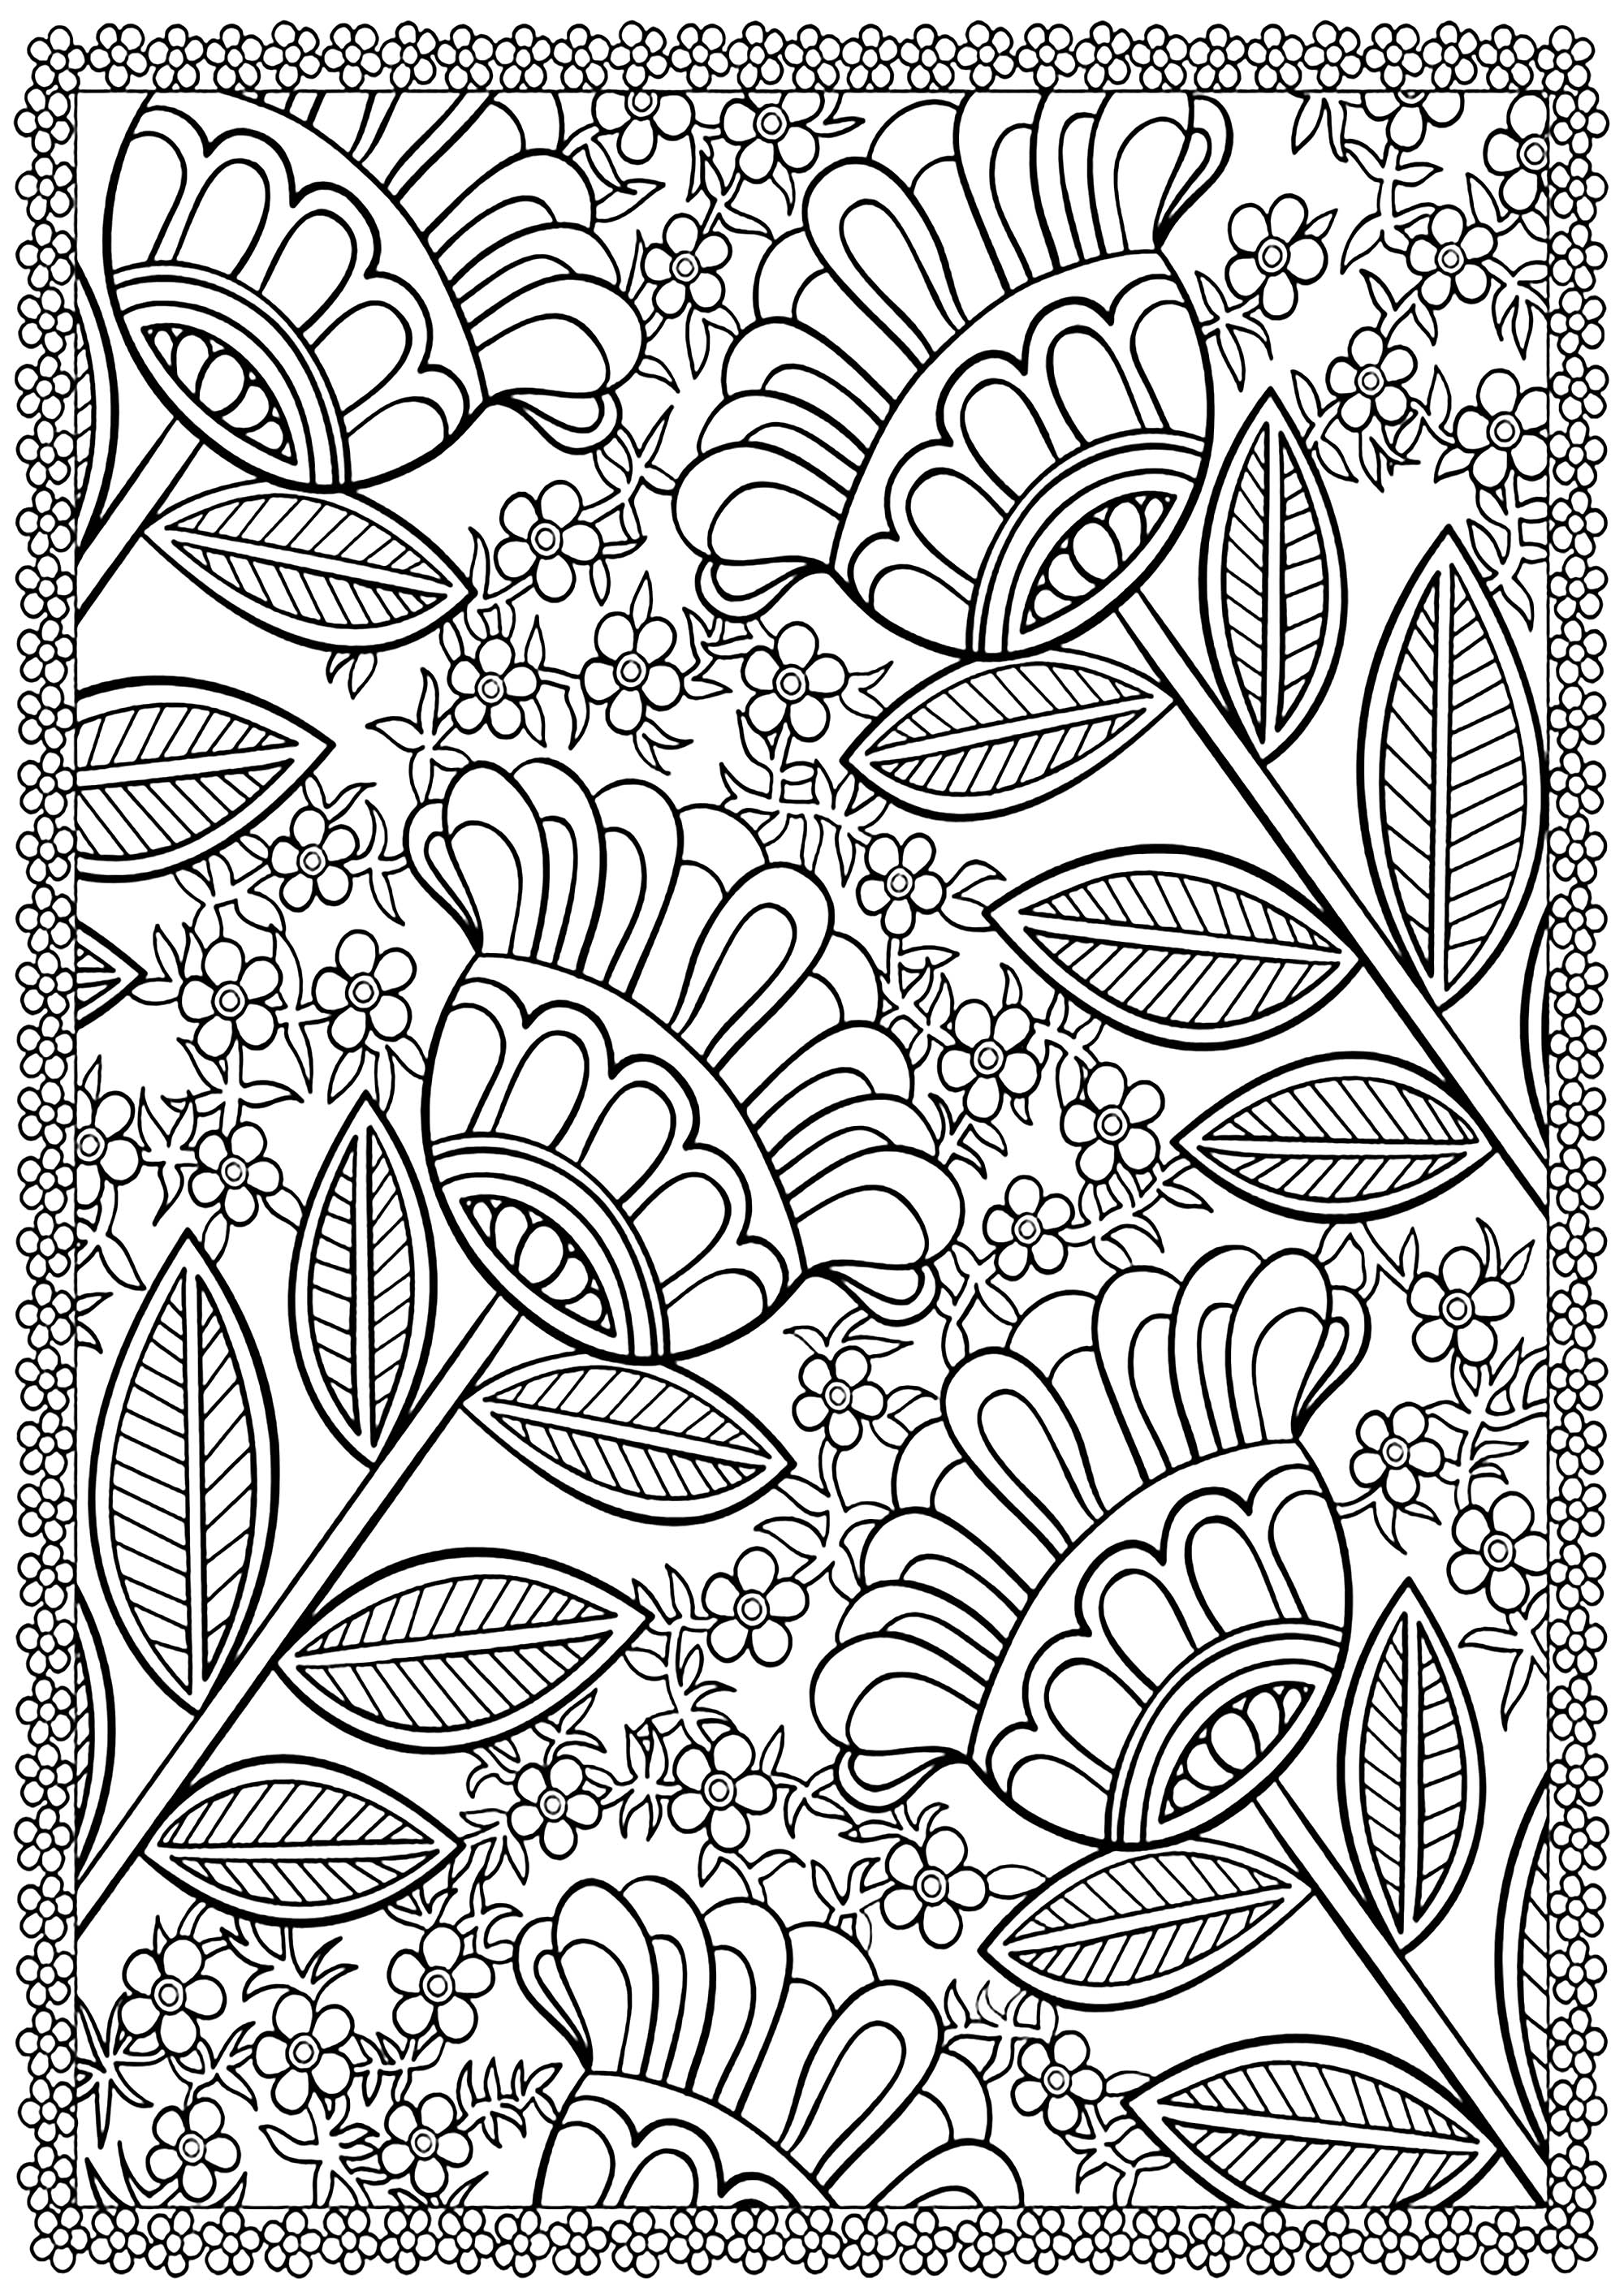 Download Four big flowers - Flowers Adult Coloring Pages